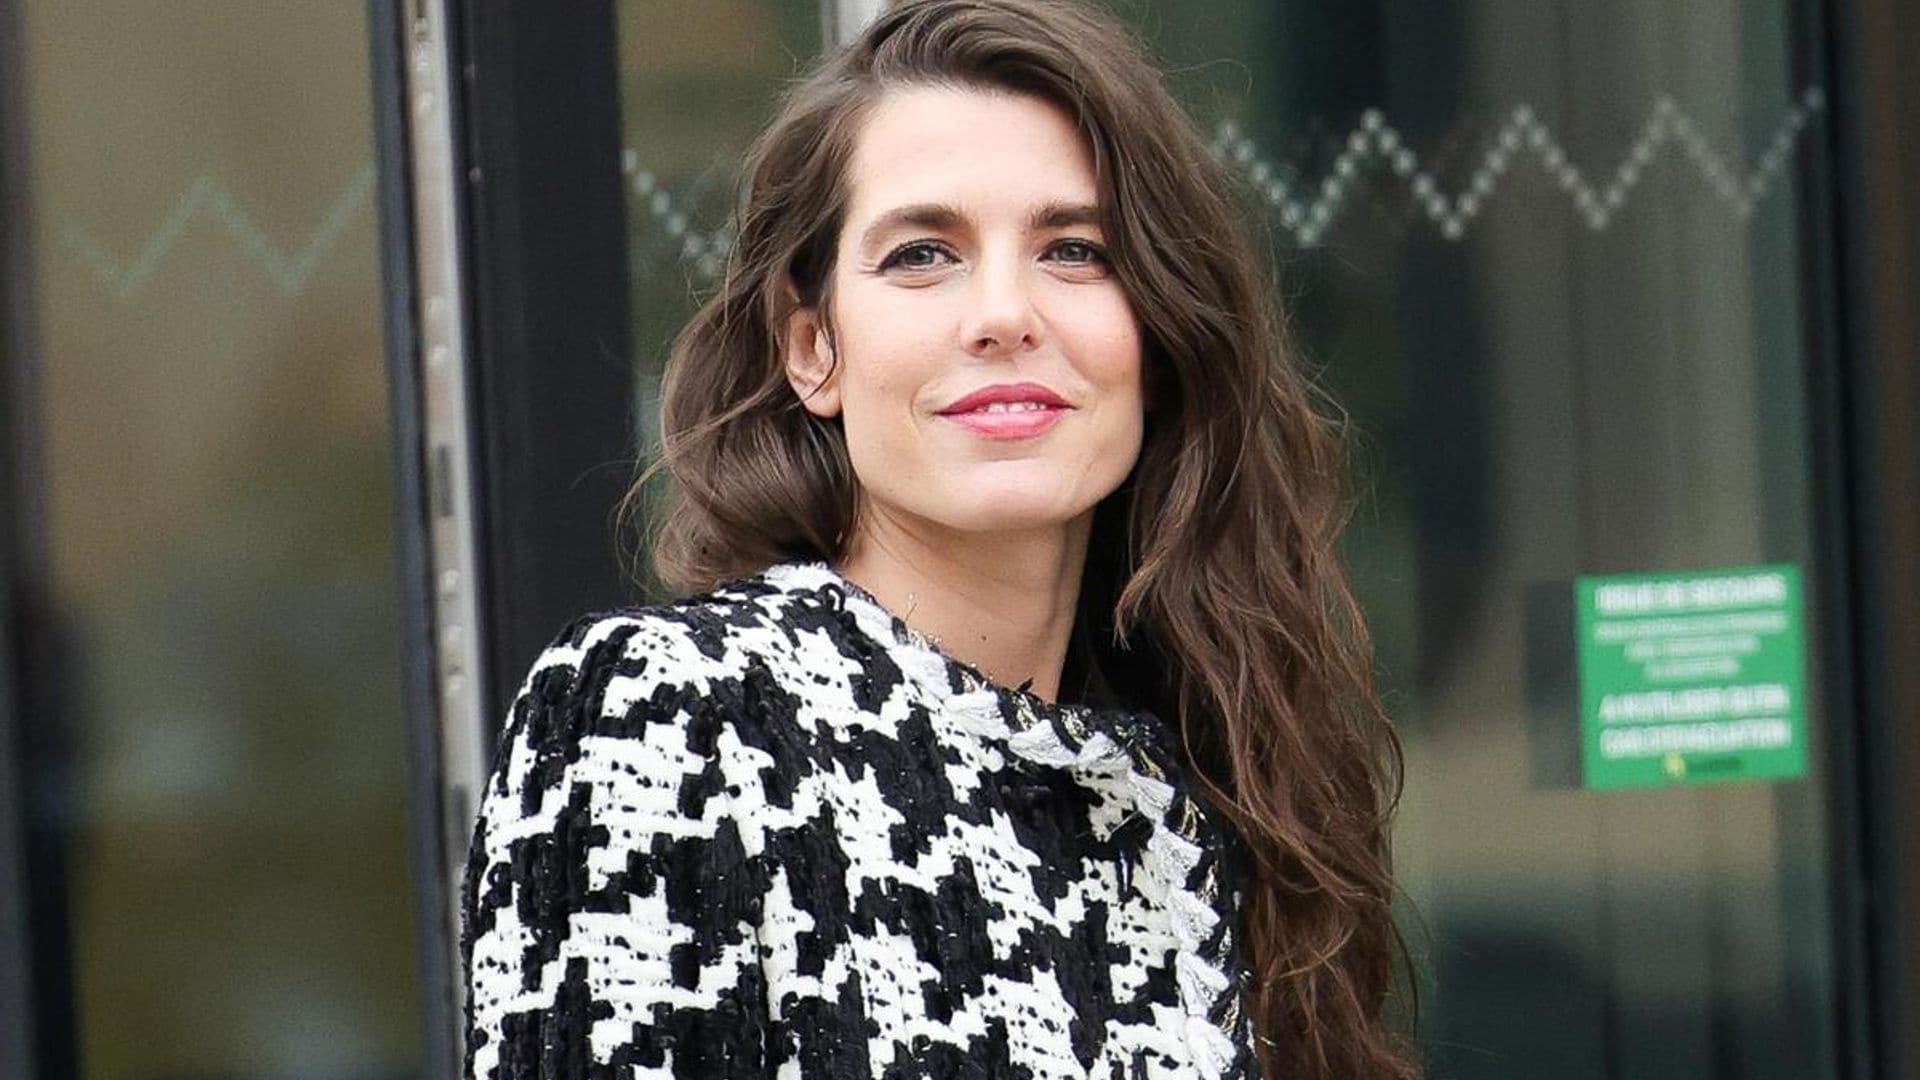 Is Charlotte Casiraghi's son Raphael an uncle